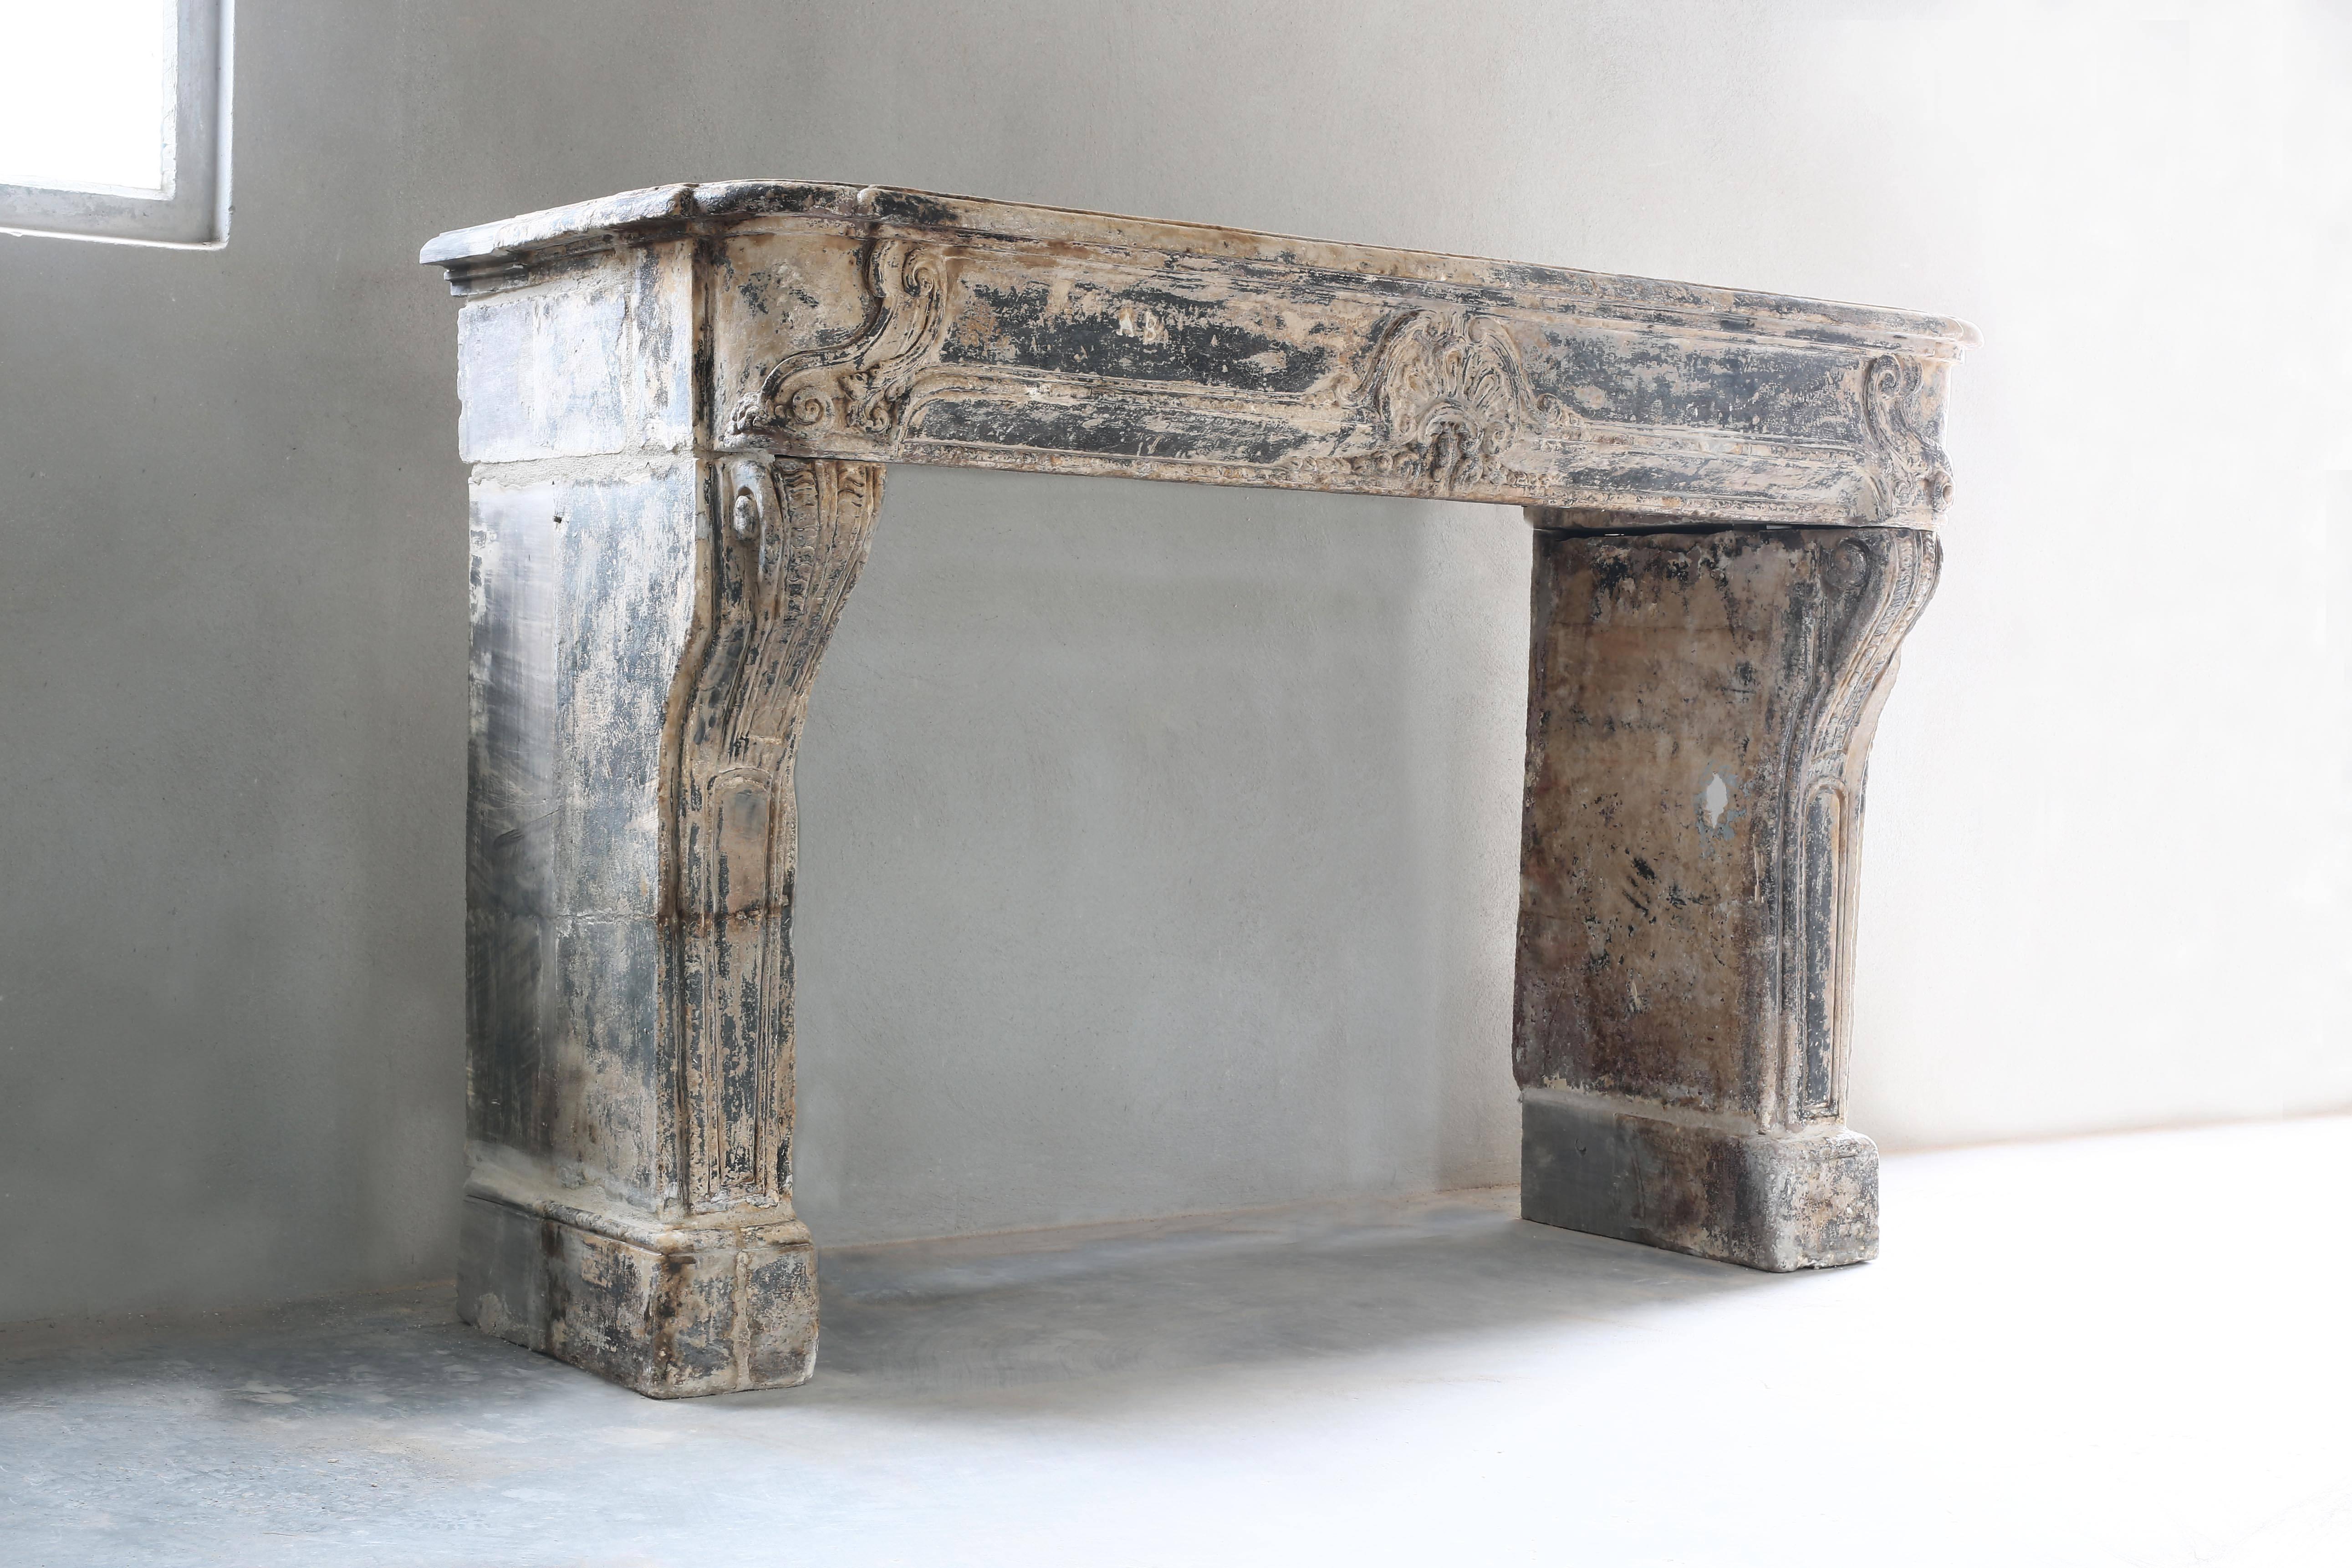 Beautiful patinated antique fireplace from the 18th century in the style of Regénce. The chimney has a beautiful color and elegant shape. Other indications for the Regénce style are late Baroque and pre-Rococo. Characteristic of fireplaces from this